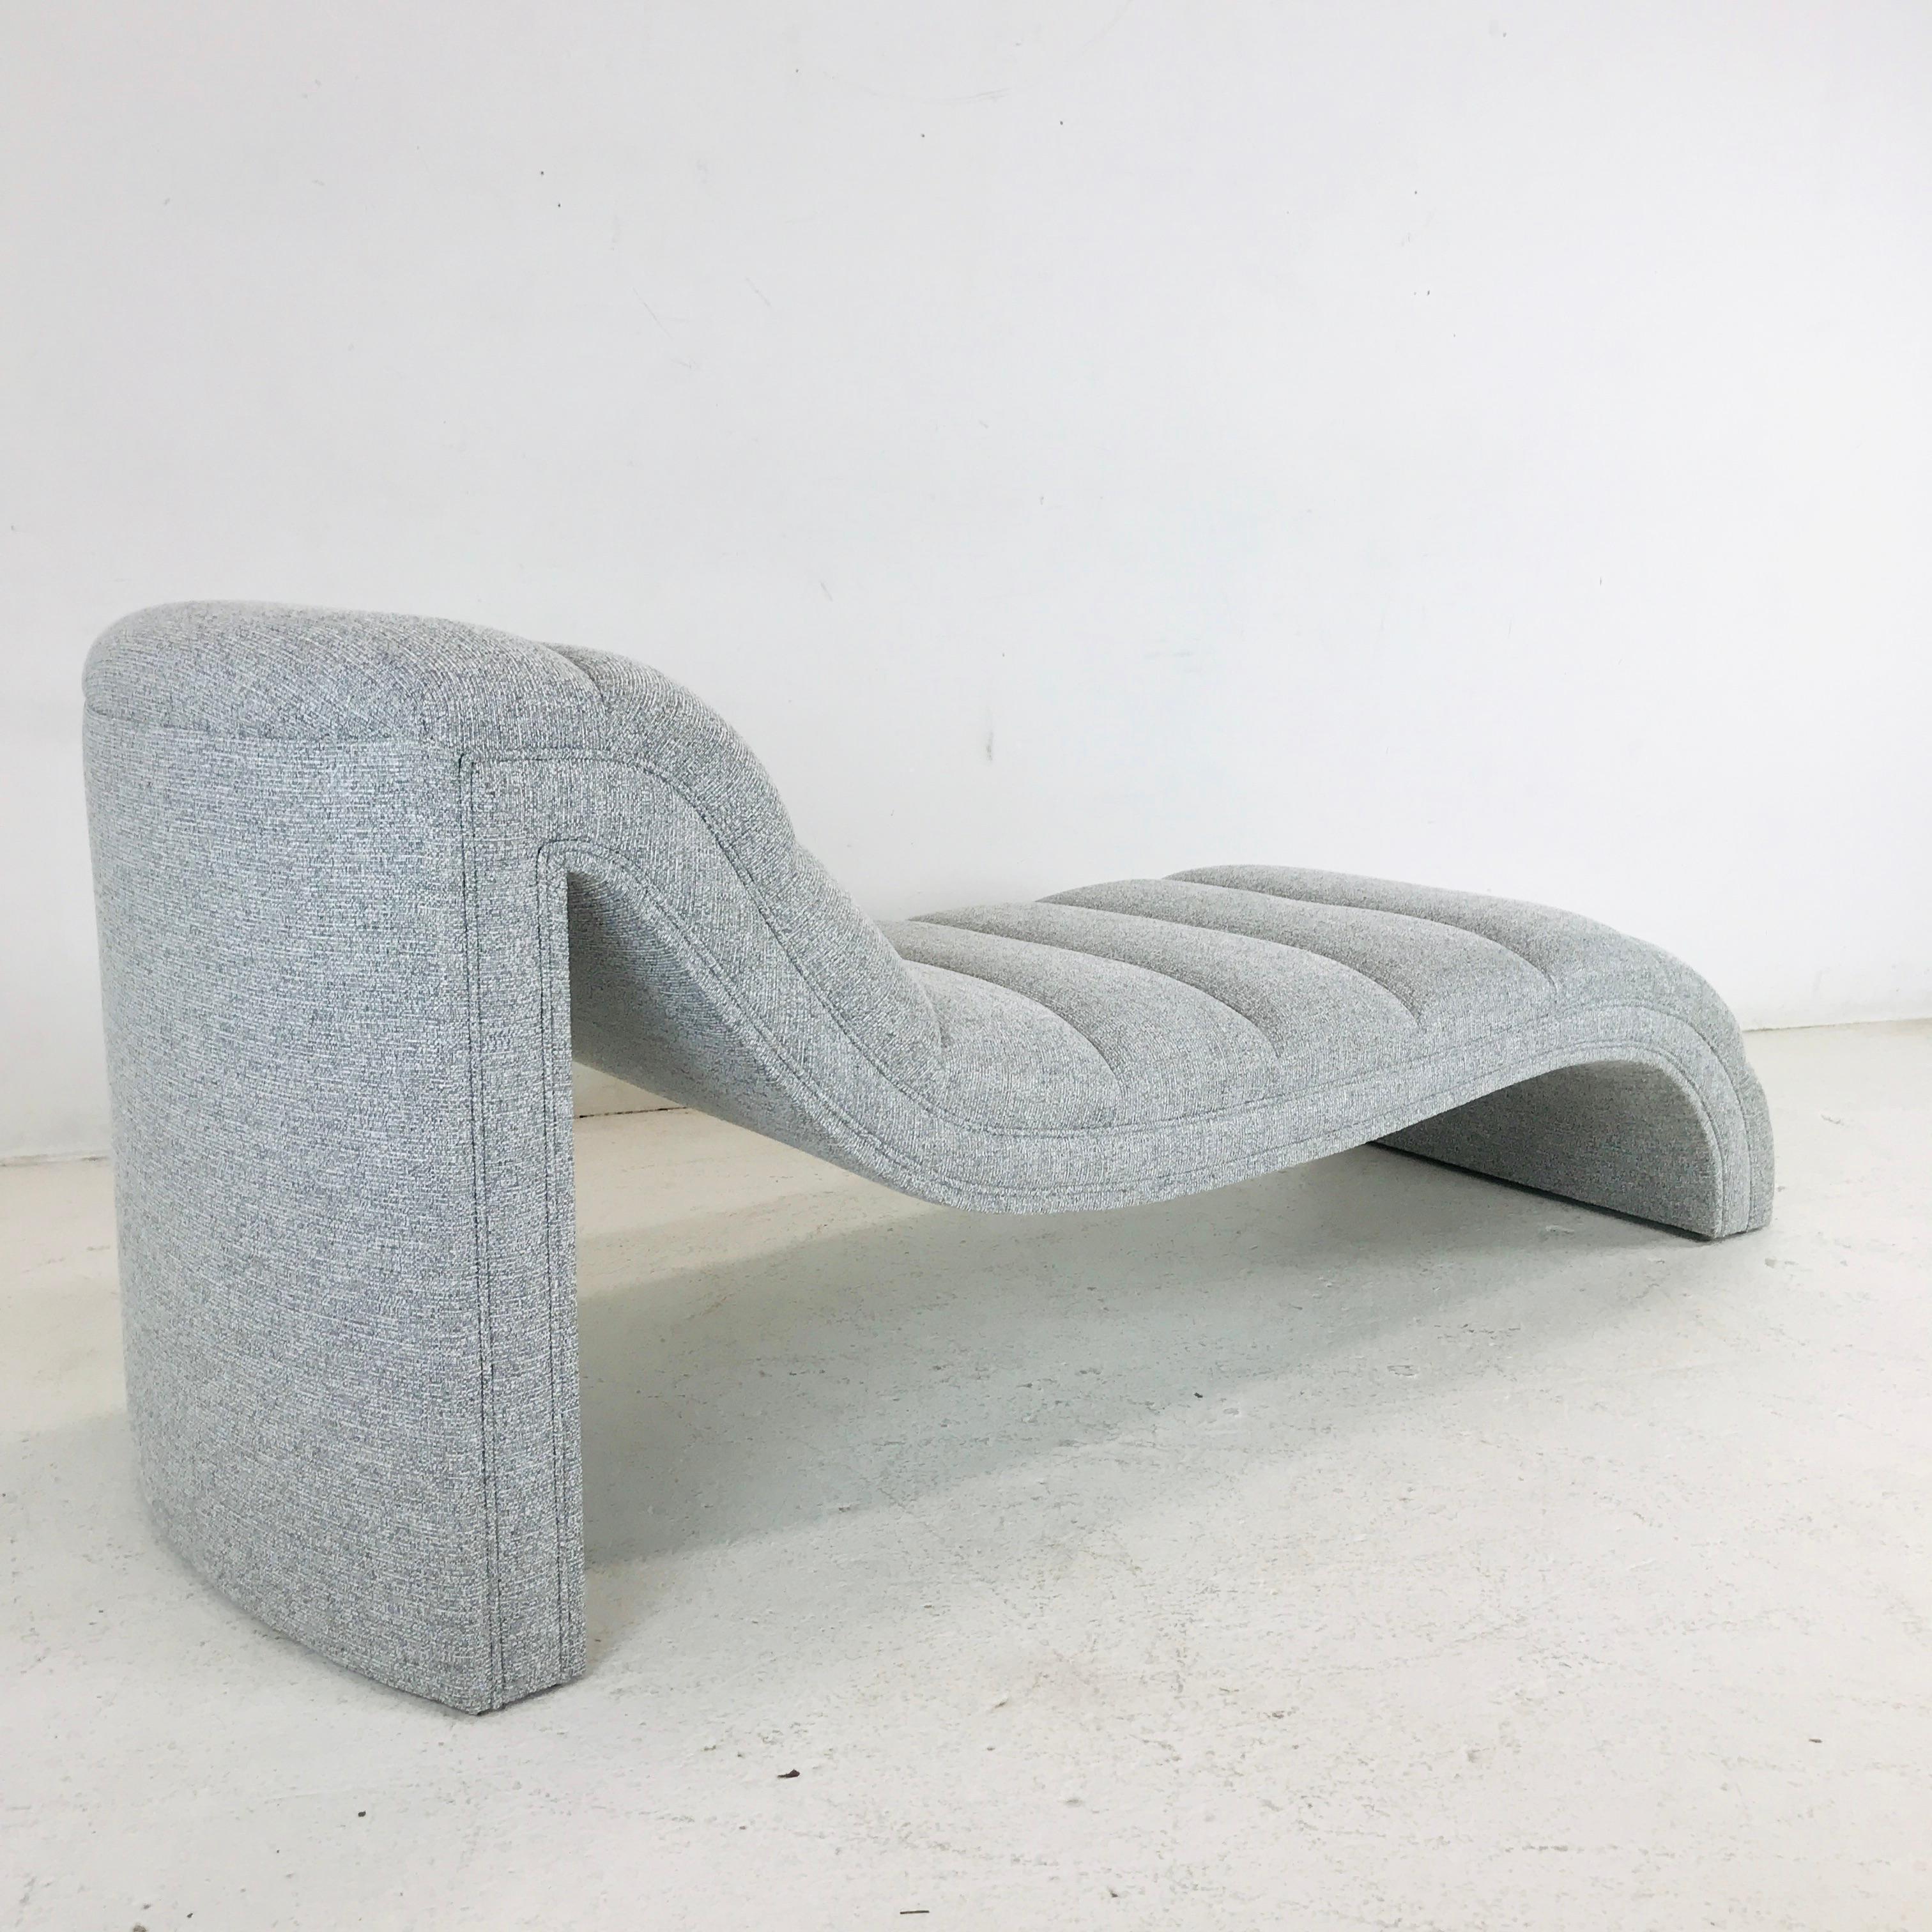 Custom channeled chaise lounge. Available as shown, or in your choice of fabric for $5200 + 13 yards COM. Size and style modifications can be made for an additional cost.

For custom orders please allow a 6-8 week lead time.